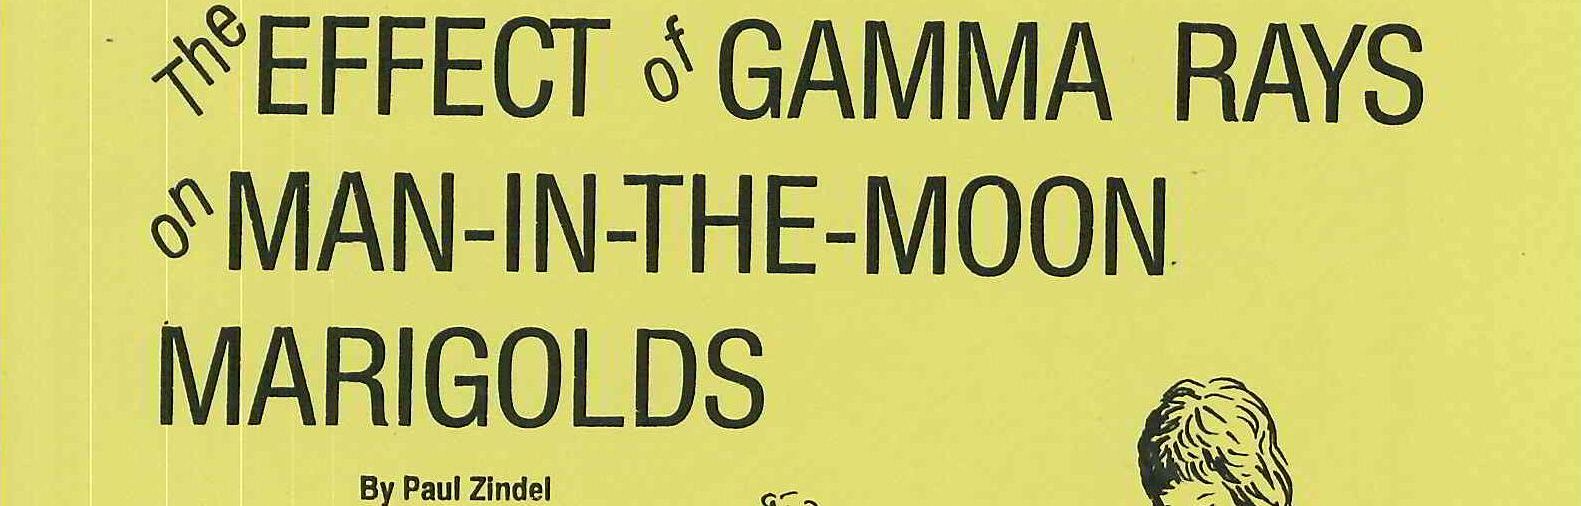 The Effect of Gamma Rays on Man-in-the-Moon Marigolds (1992)